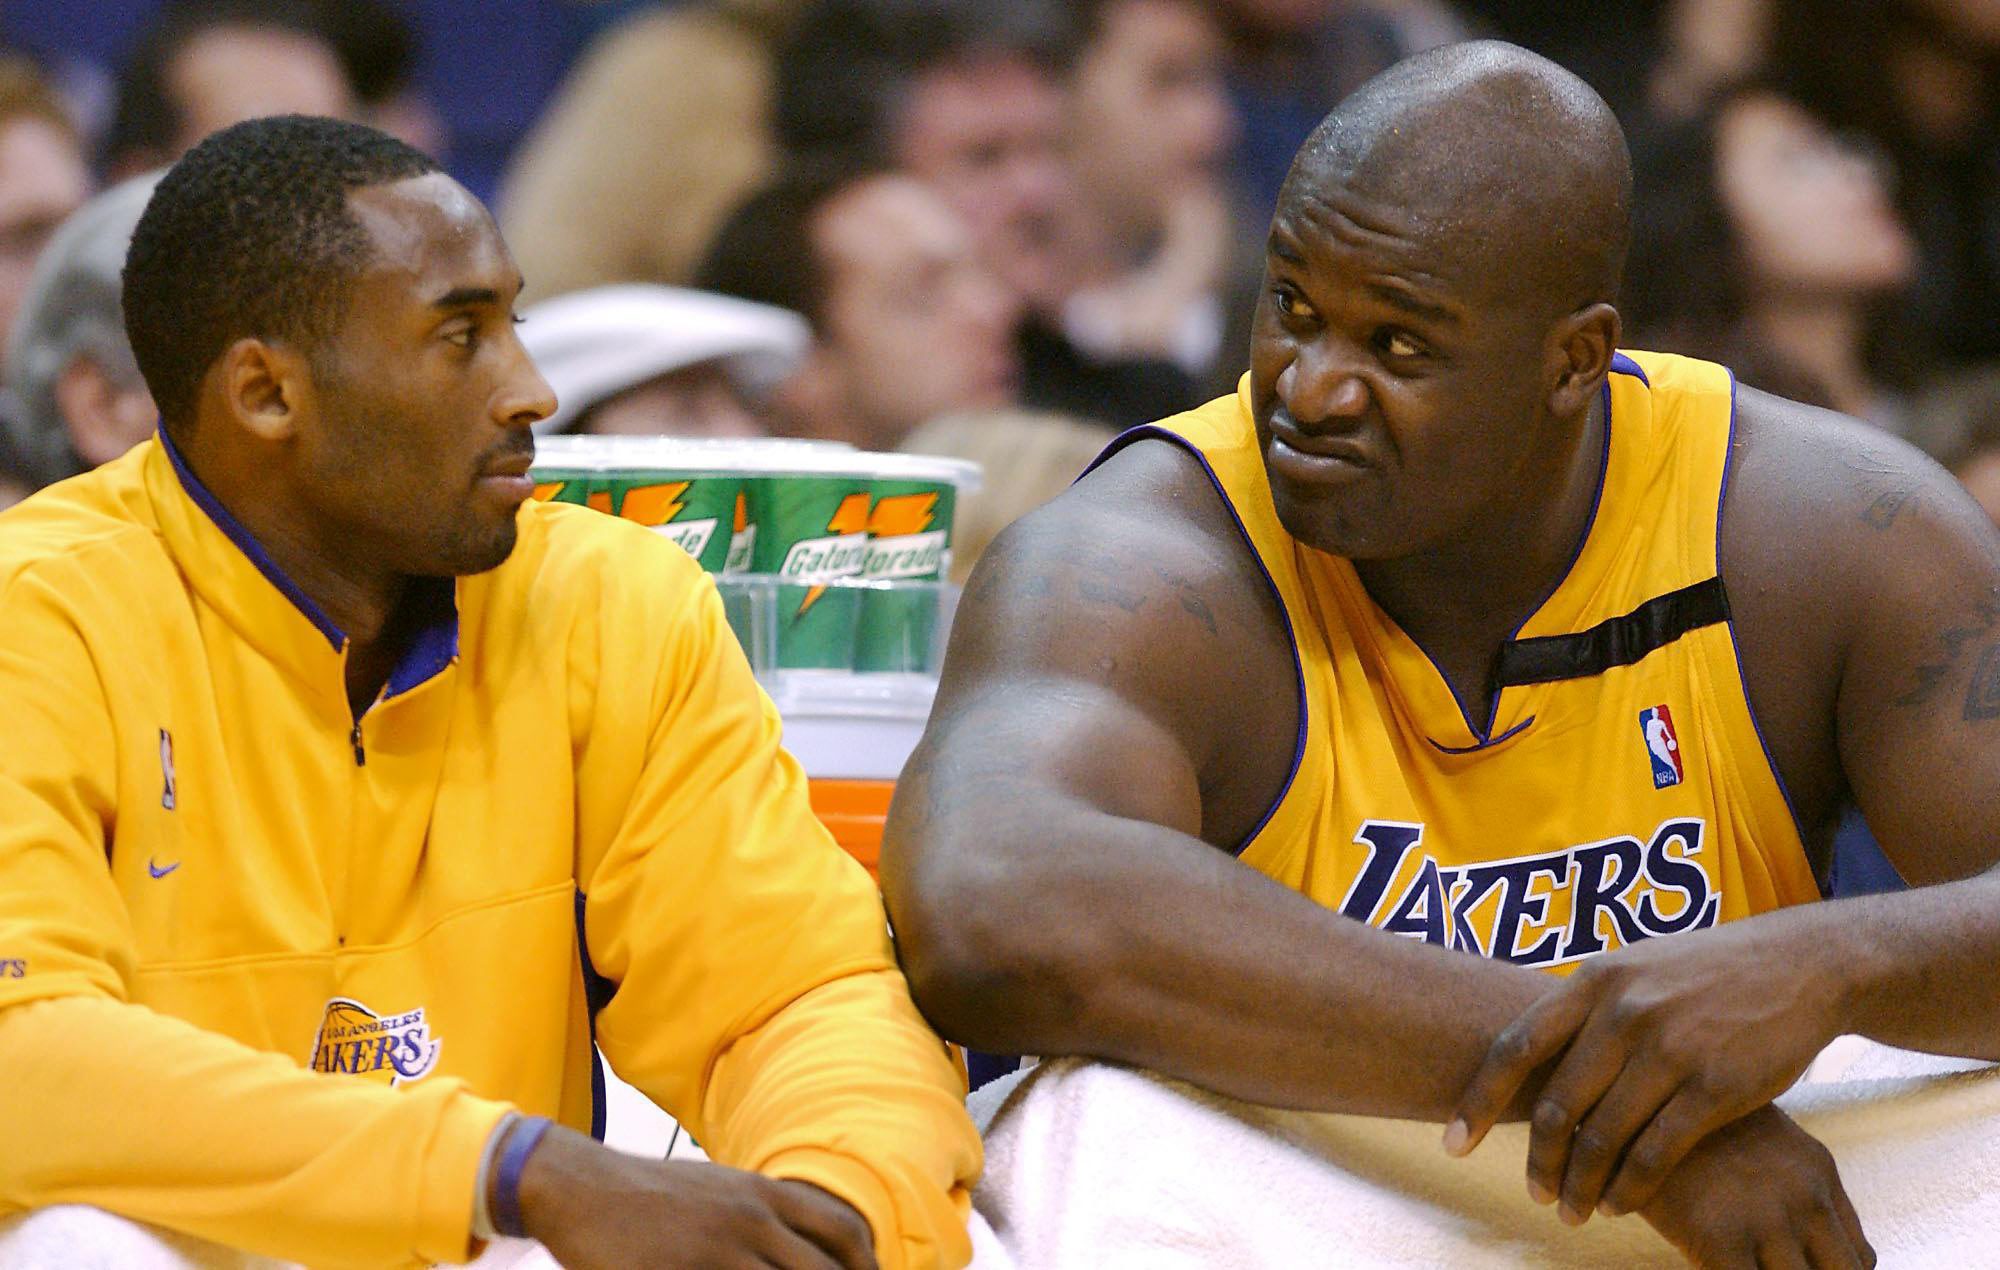 Shaquille O’Neal’s Game-Worn Uniform Sets Auction Record